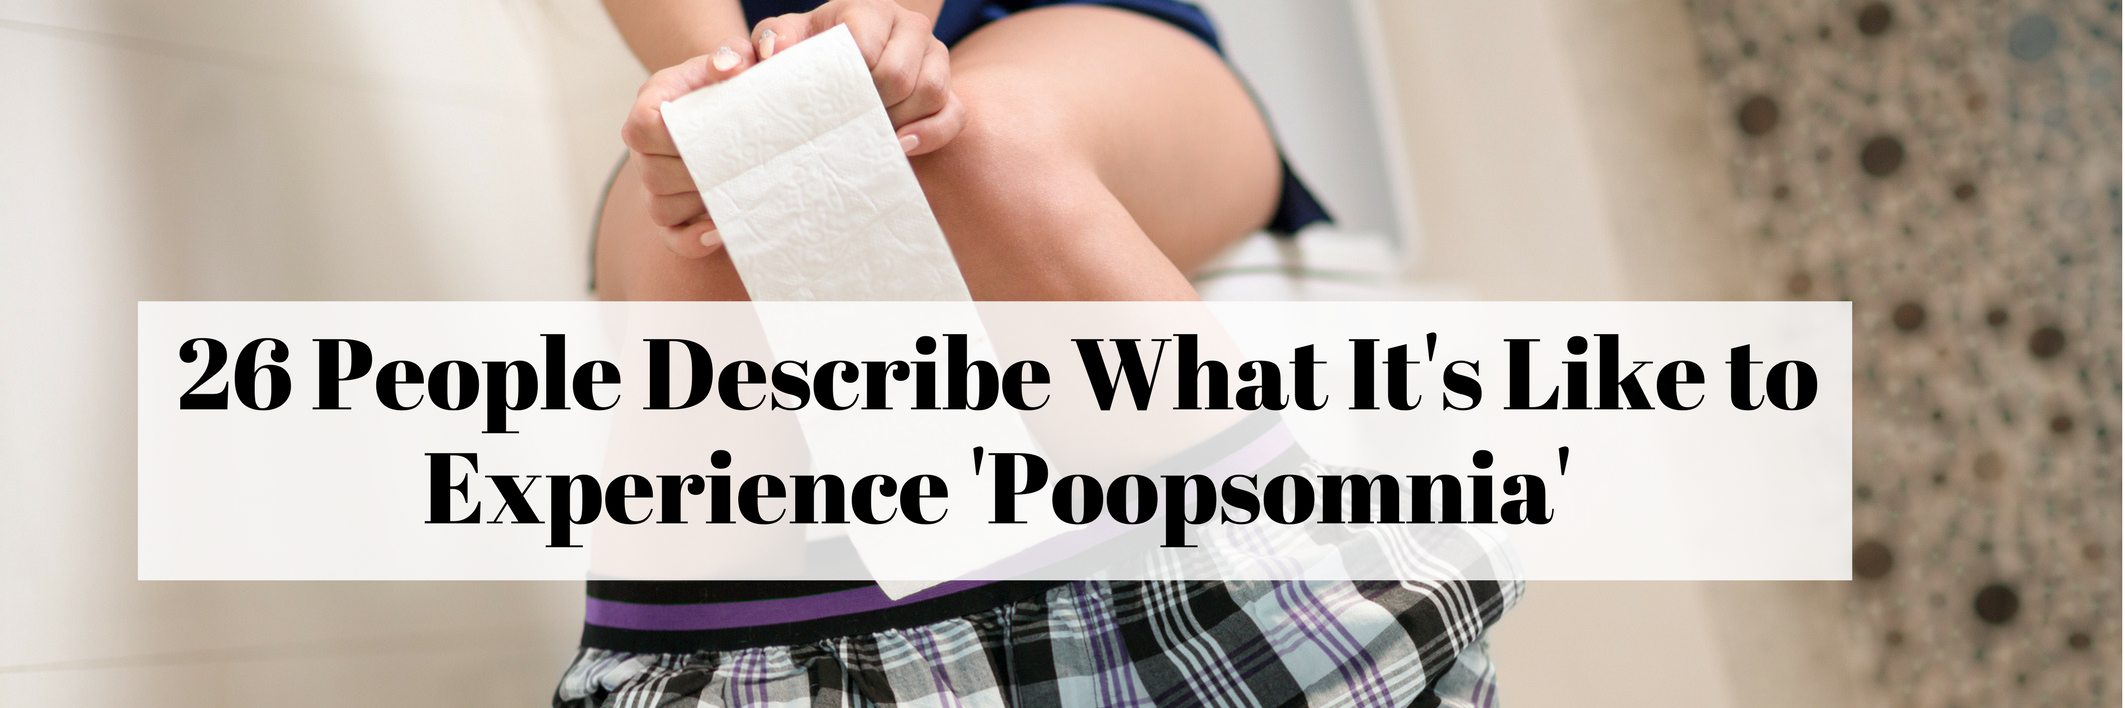 26 People Describe What It's Like to Experience 'Poopsomnia'